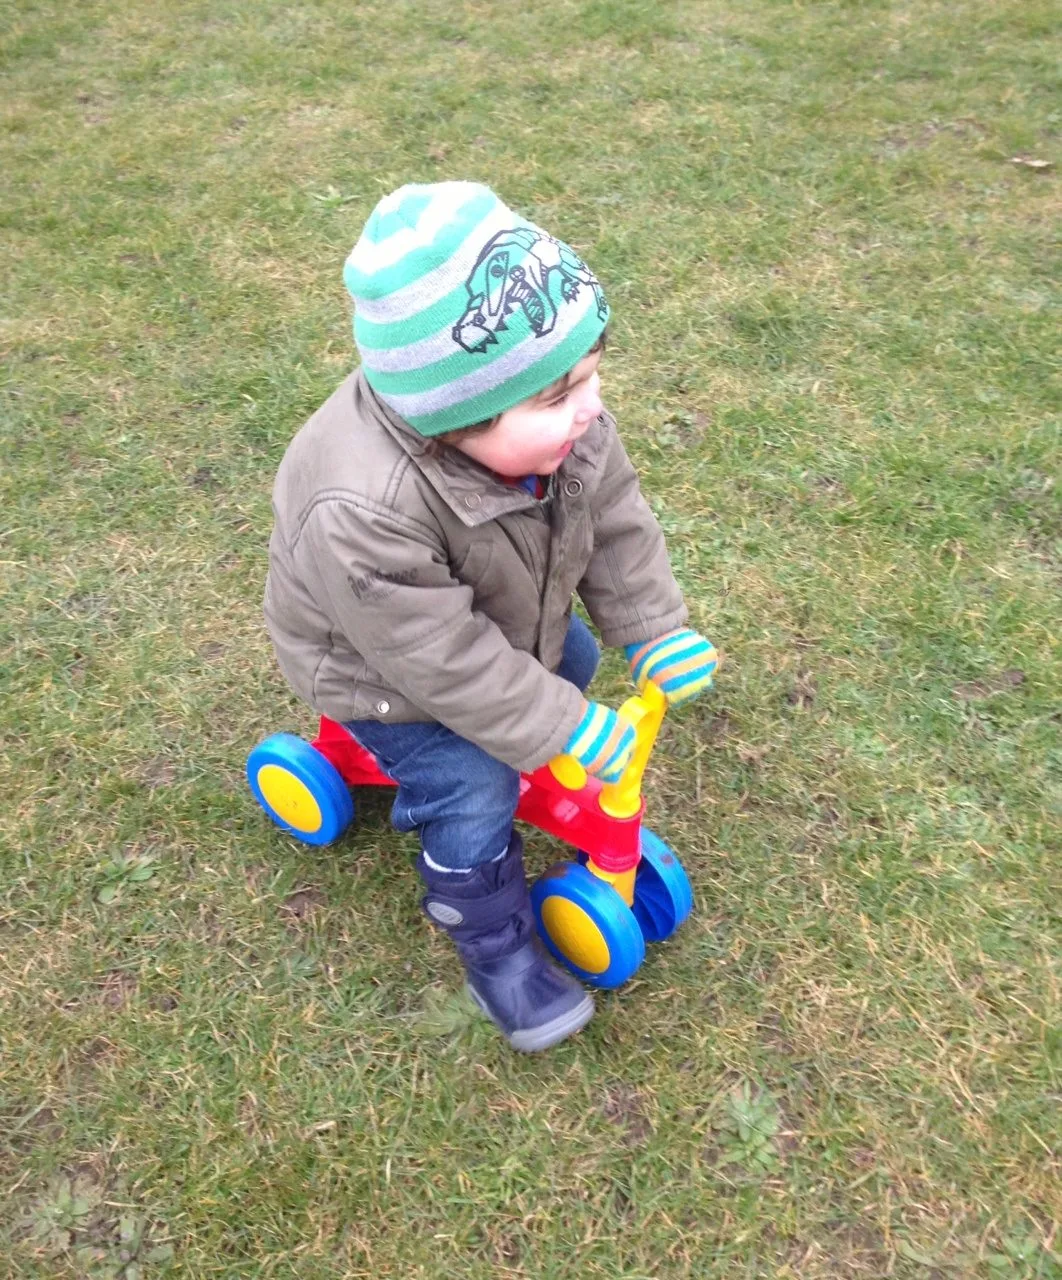 Toddlebike review 3